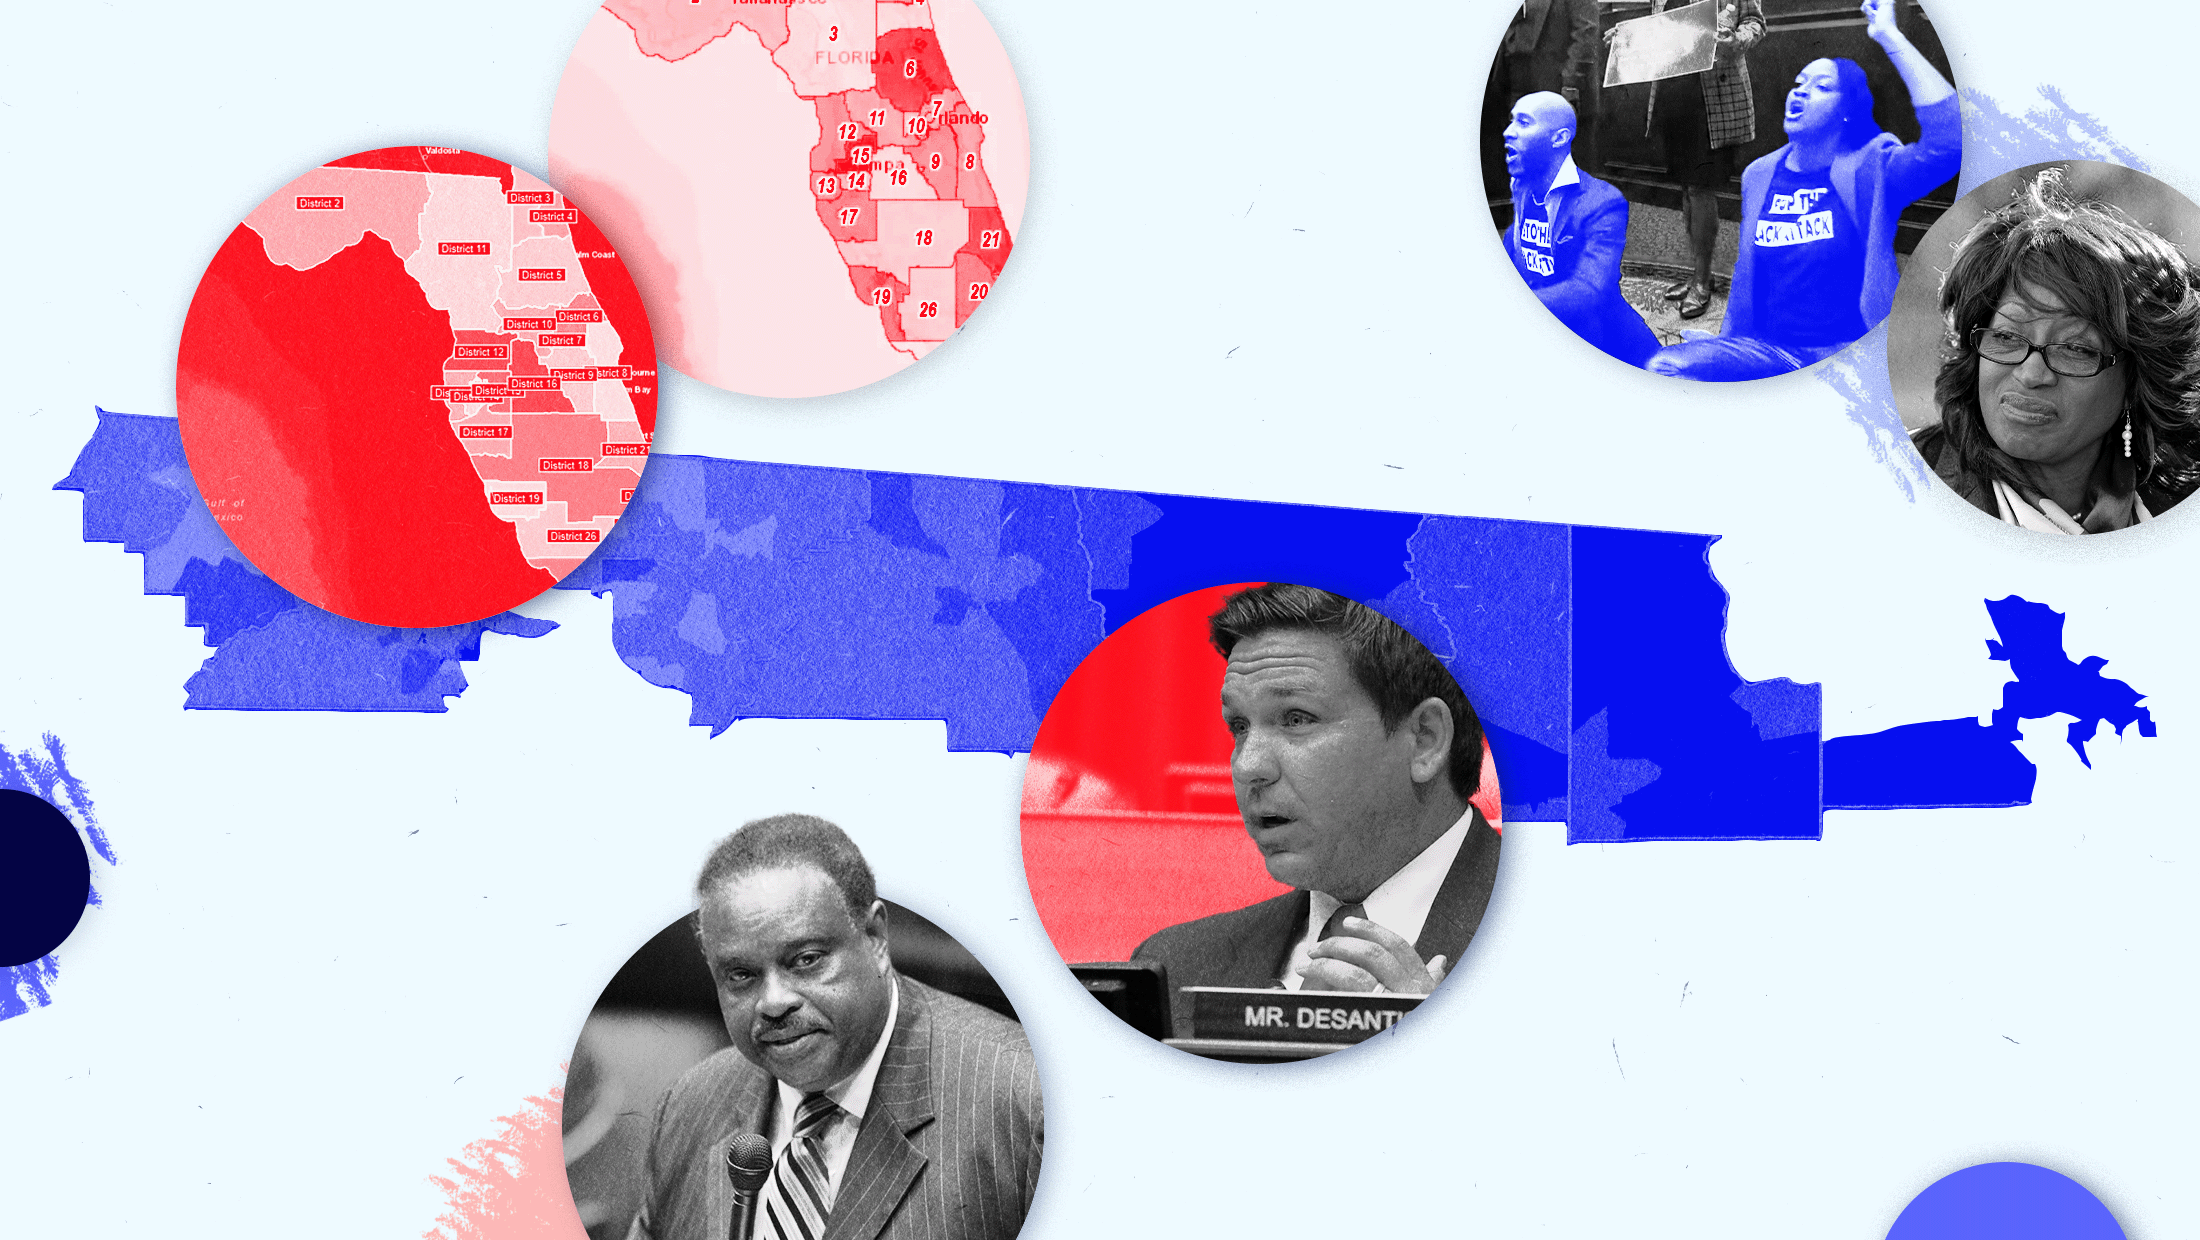 A collage of 6 circular pictures, featuring Desantis, Brown, Lawson, the Florida Legislature sit in, and two pictures of Florida's maps. Light blue background with an overlay of the old 5th Congressional District